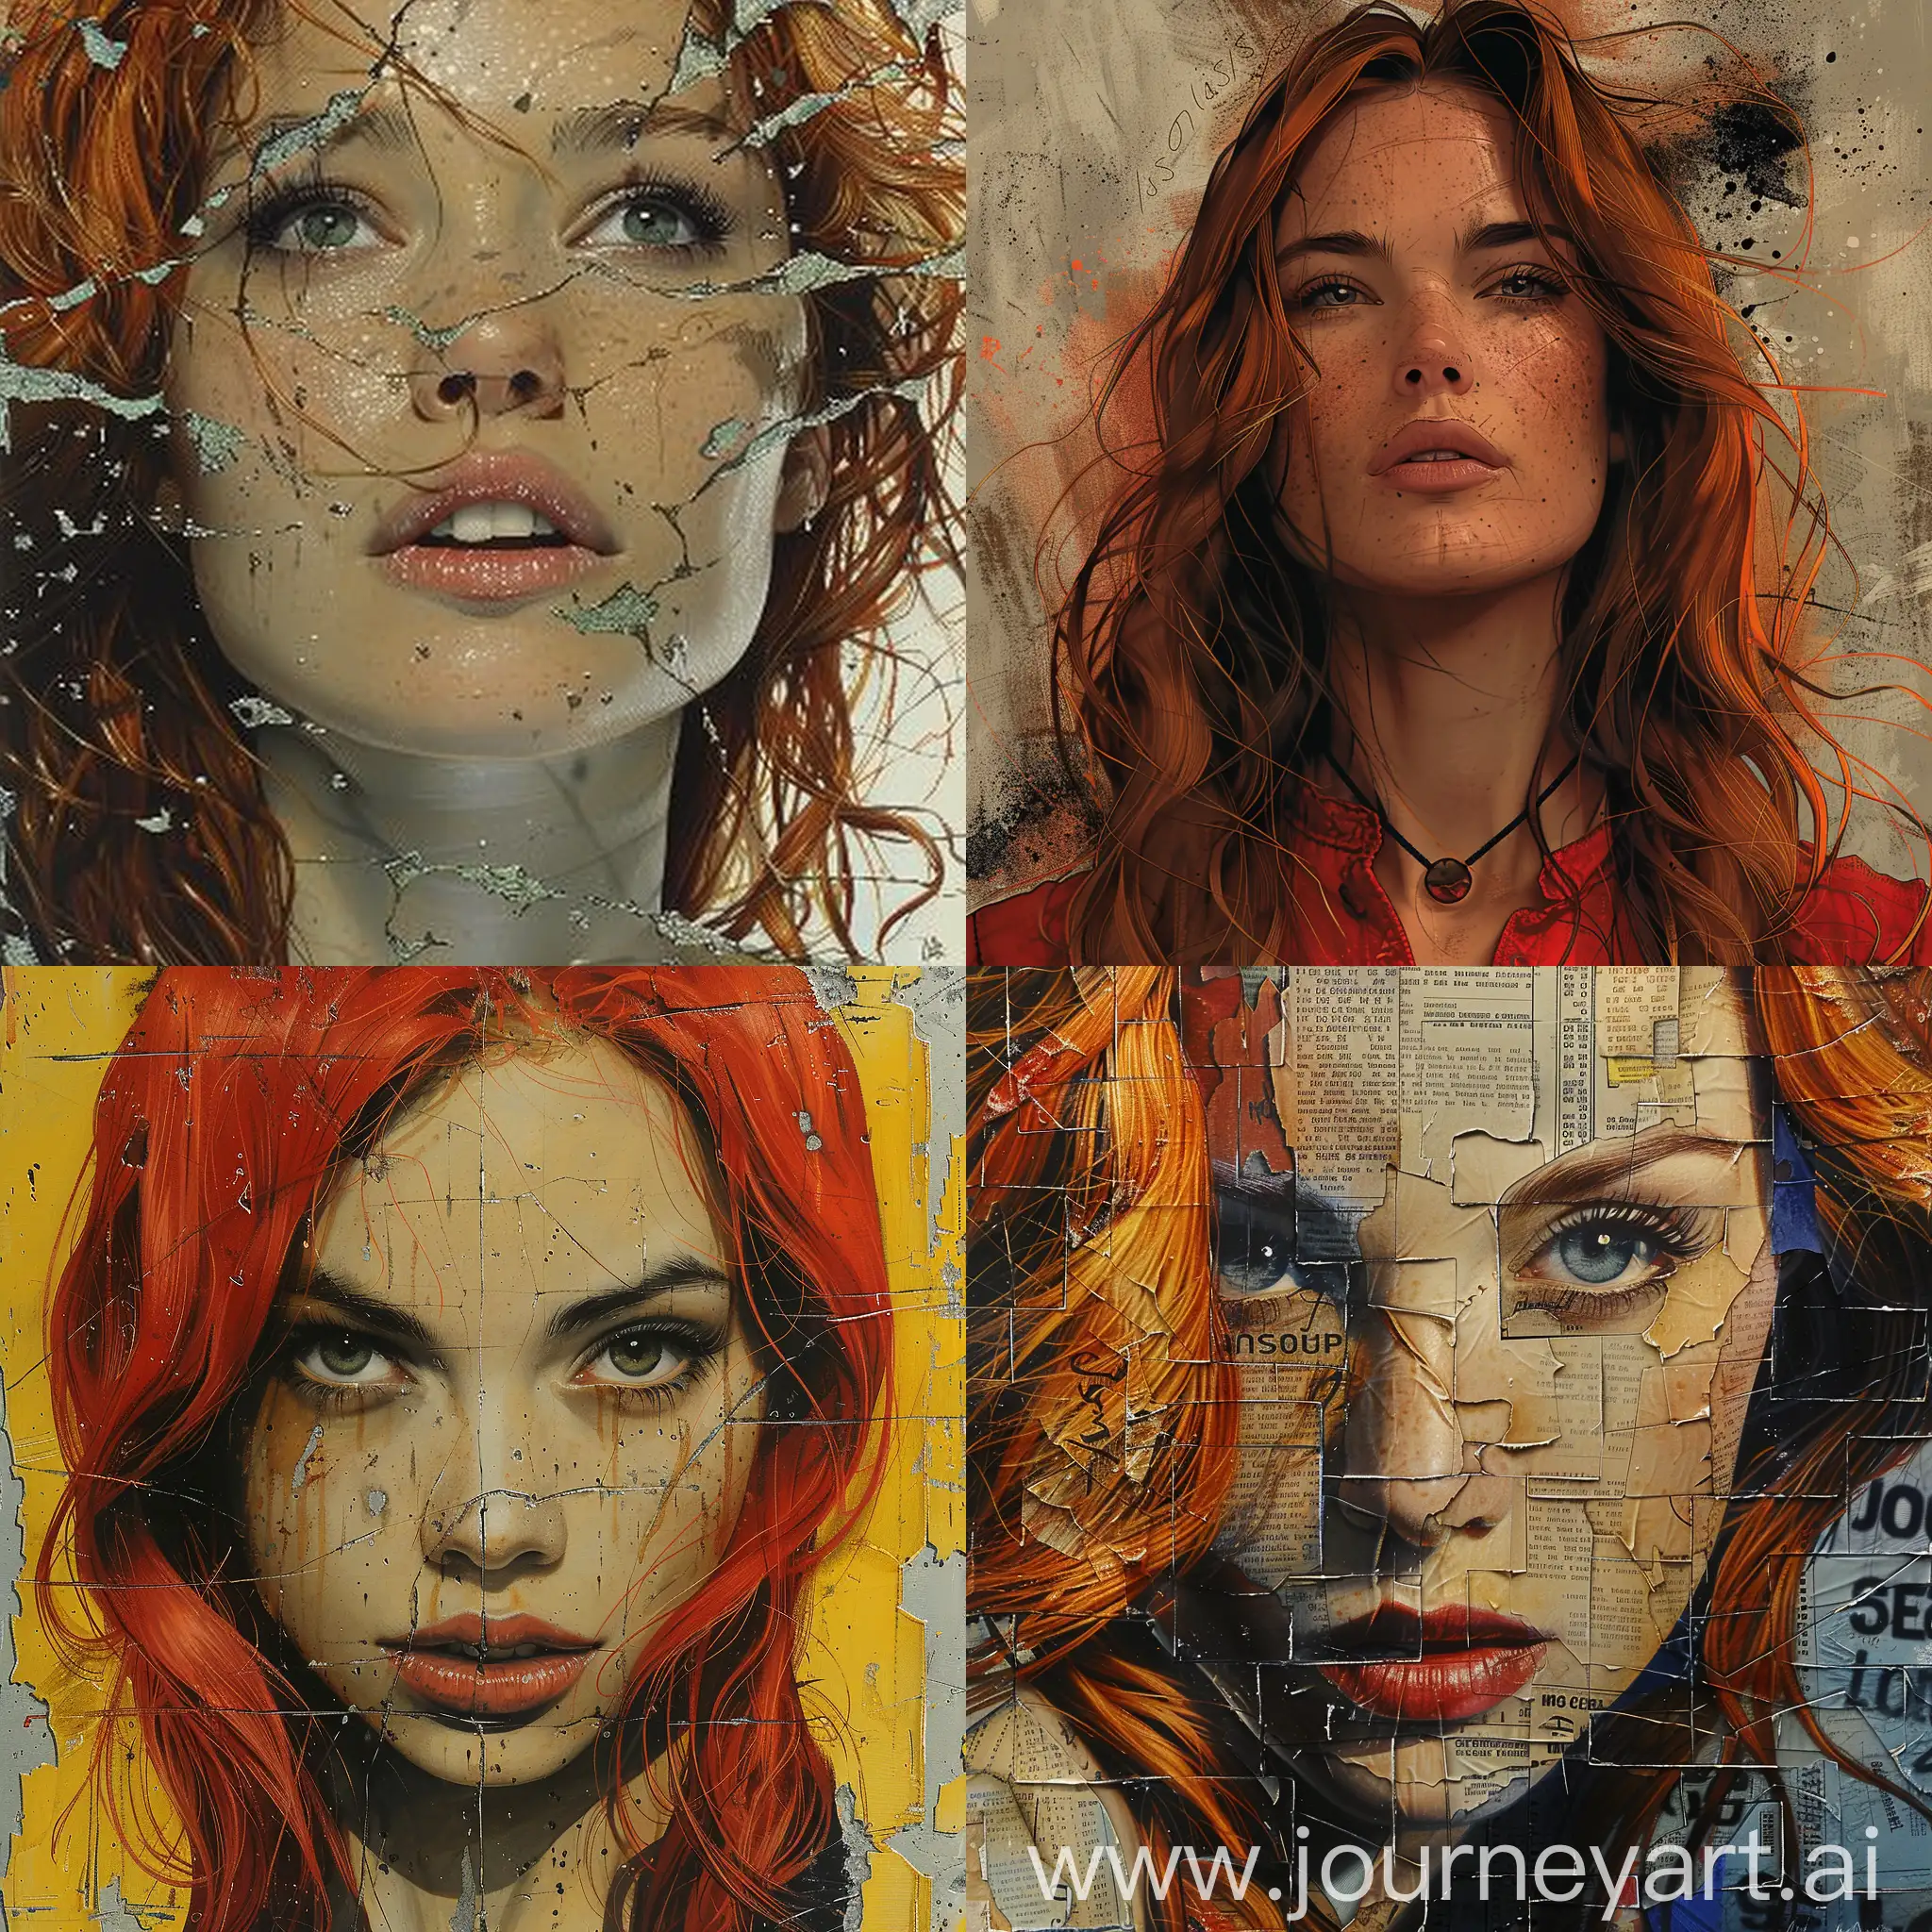 RedHaired-Woman-Collage-Art-Comic-Book-Style-Portrait